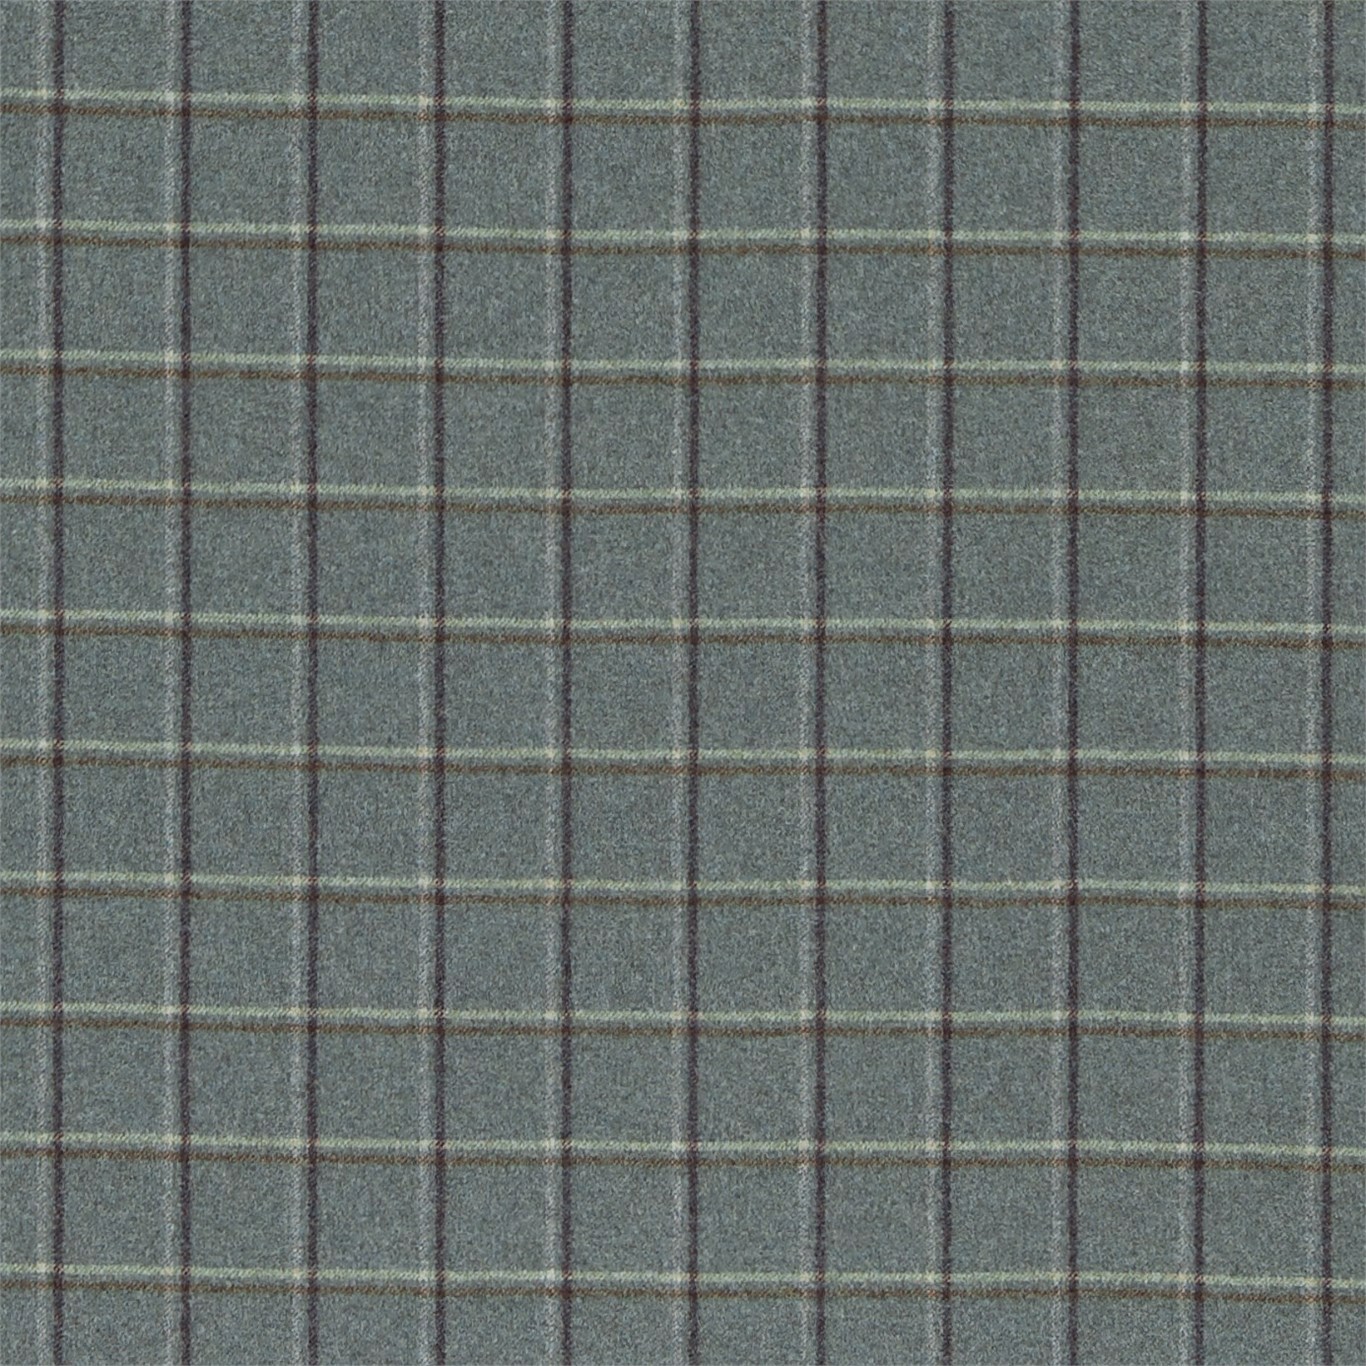 Woodford Check Bayleaf/Vellum Fabric by MOR